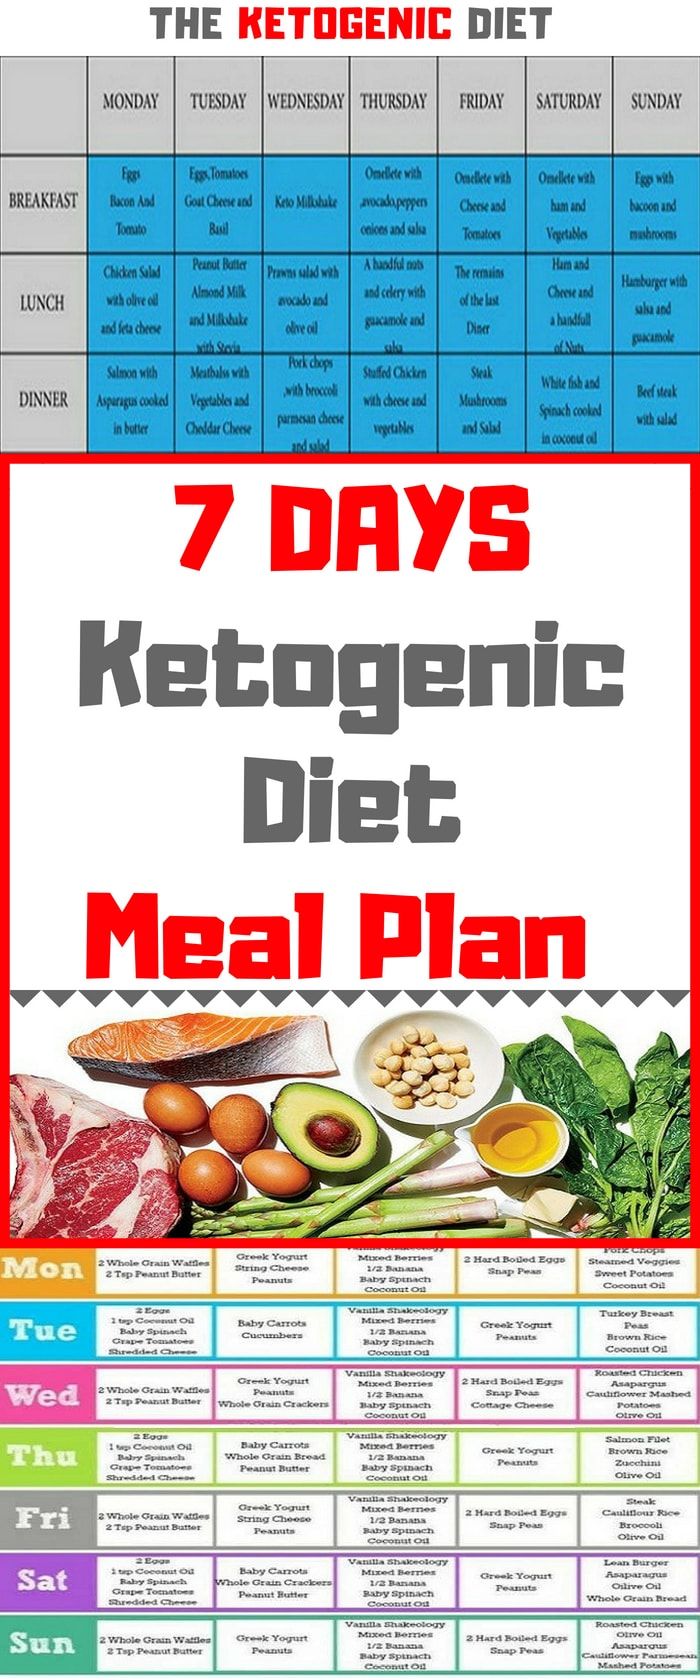 All Healthy Living Blog: Here Are 7 Day Ketogenic Diet Meal Plan